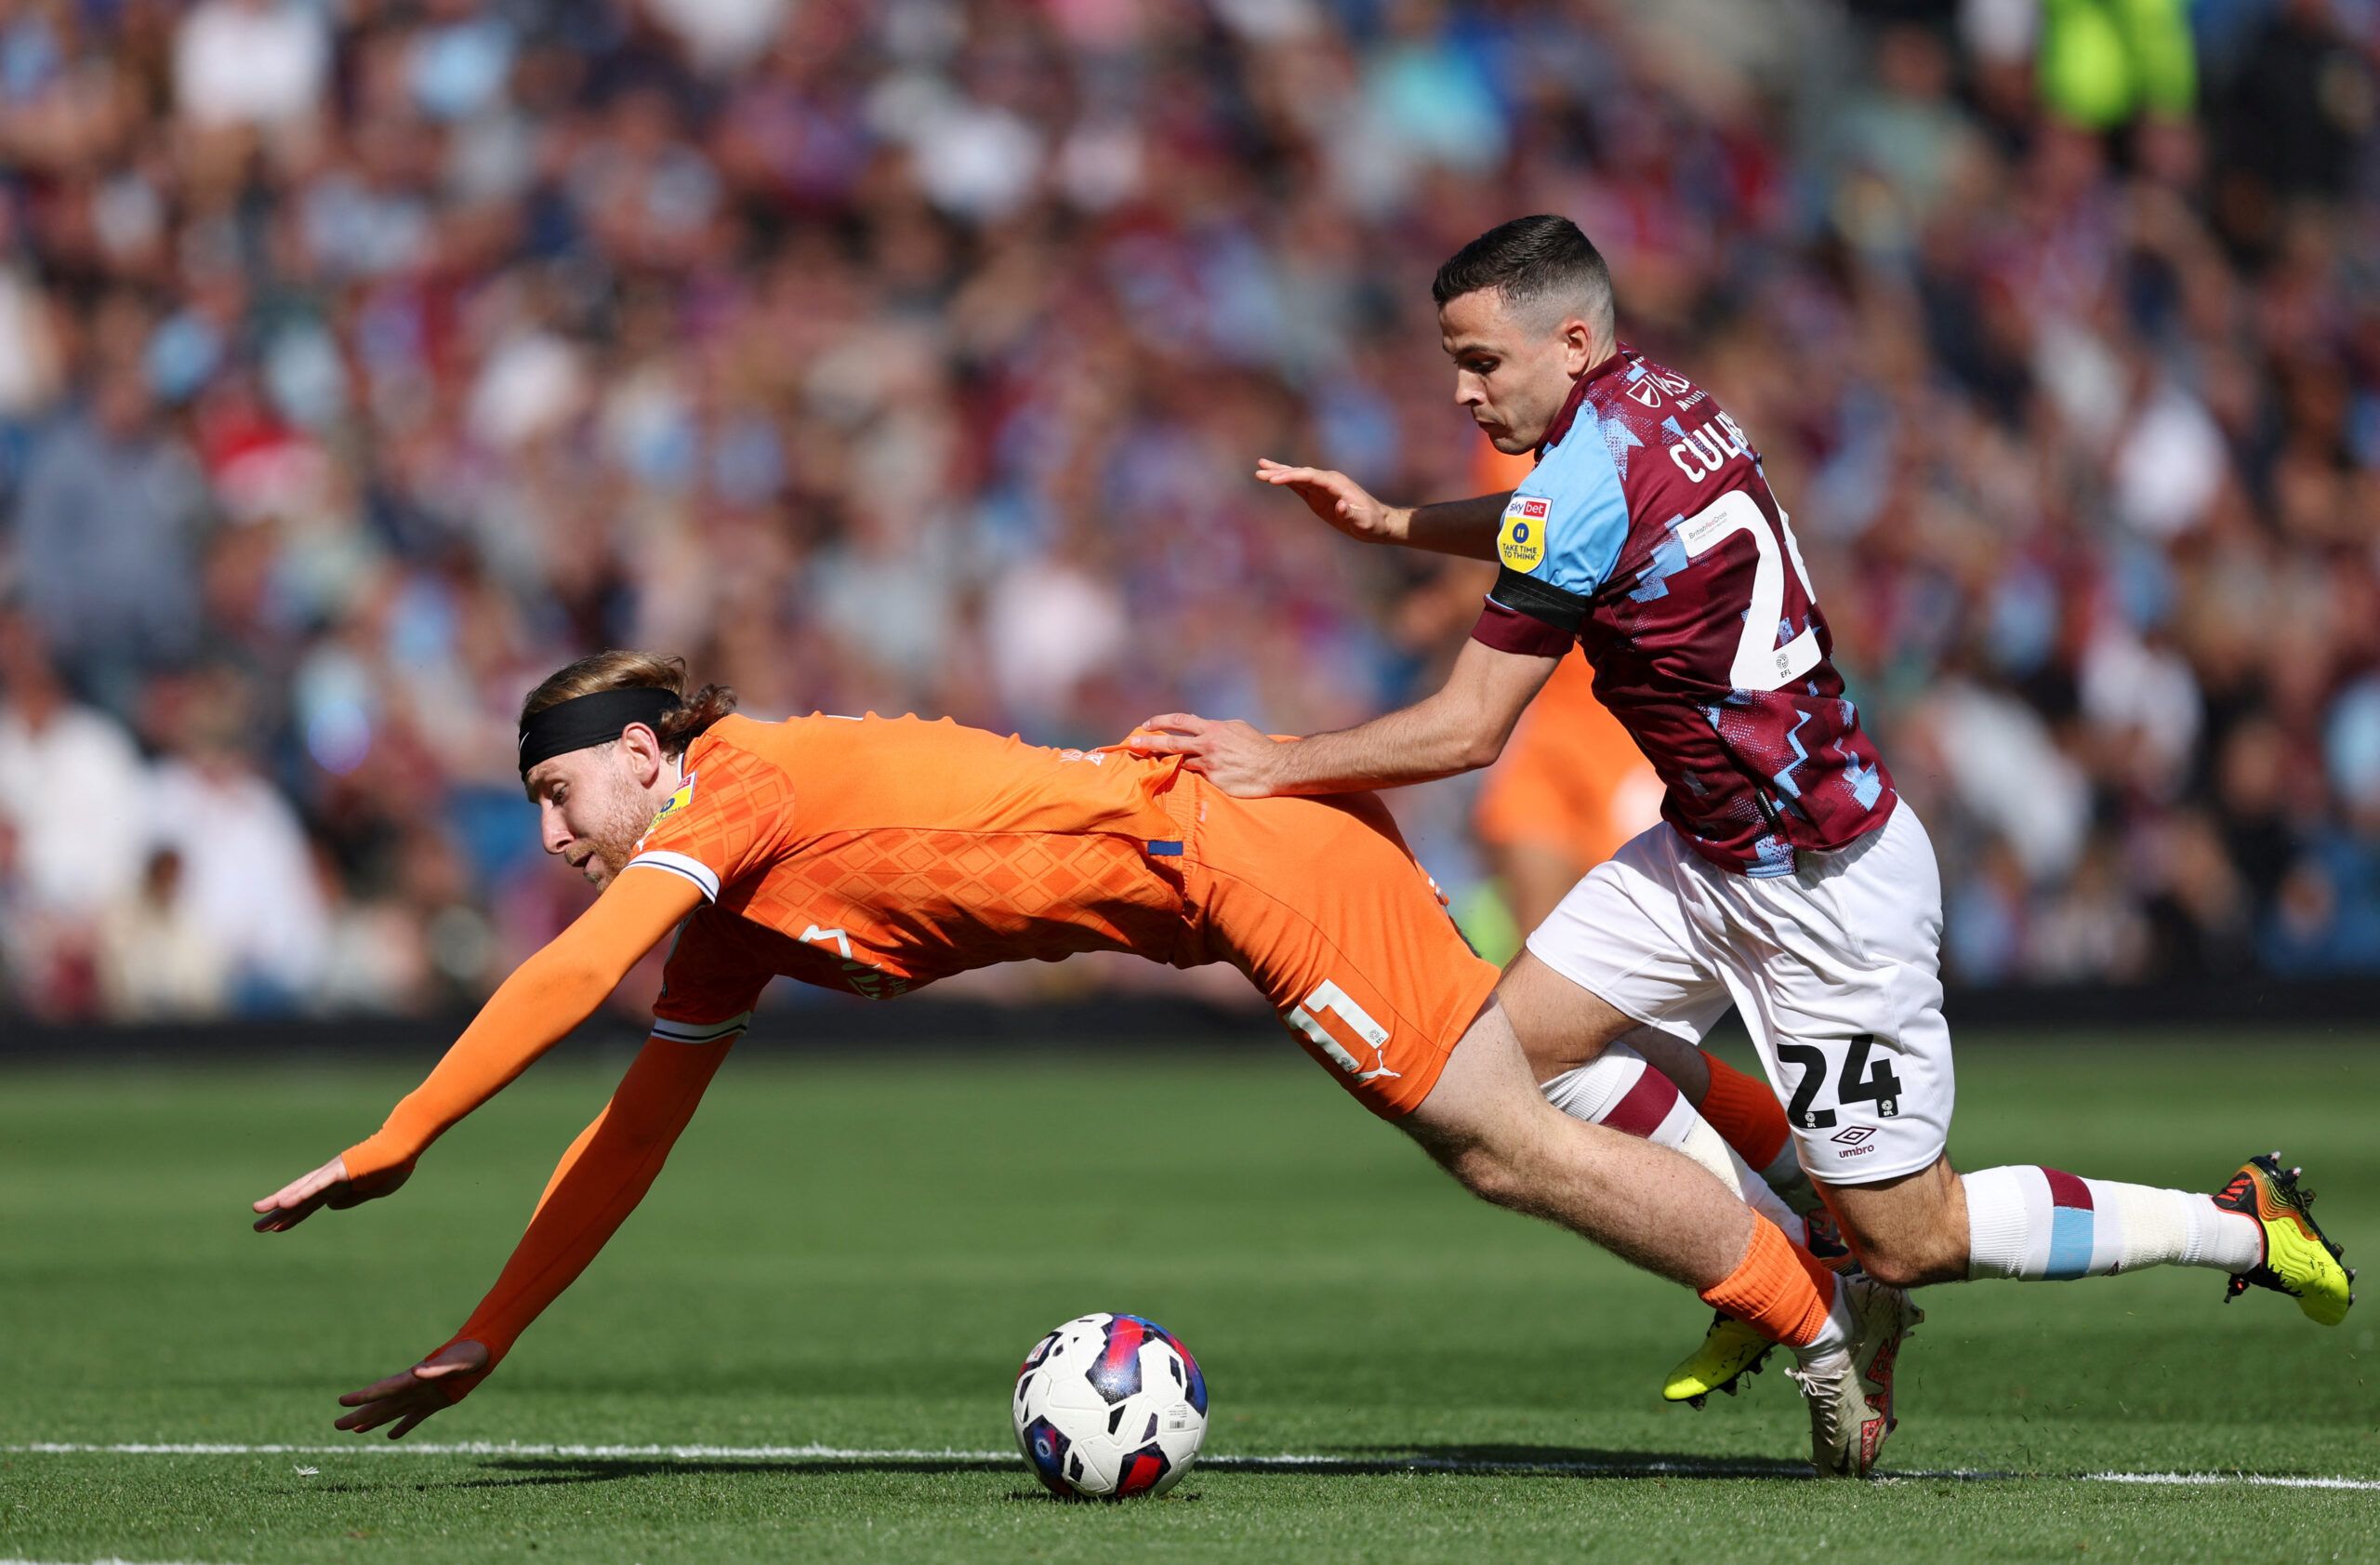 Soccer Football - Championship - Burnley v Blackpool - Turf Moor, Burnley, Britain - August 20, 2022 Blackpool's Josh Bowler in action with Burnley's Josh Cullen Action Images/John Clifton  EDITORIAL USE ONLY. No use with unauthorized audio, video, data, fixture lists, club/league logos or 